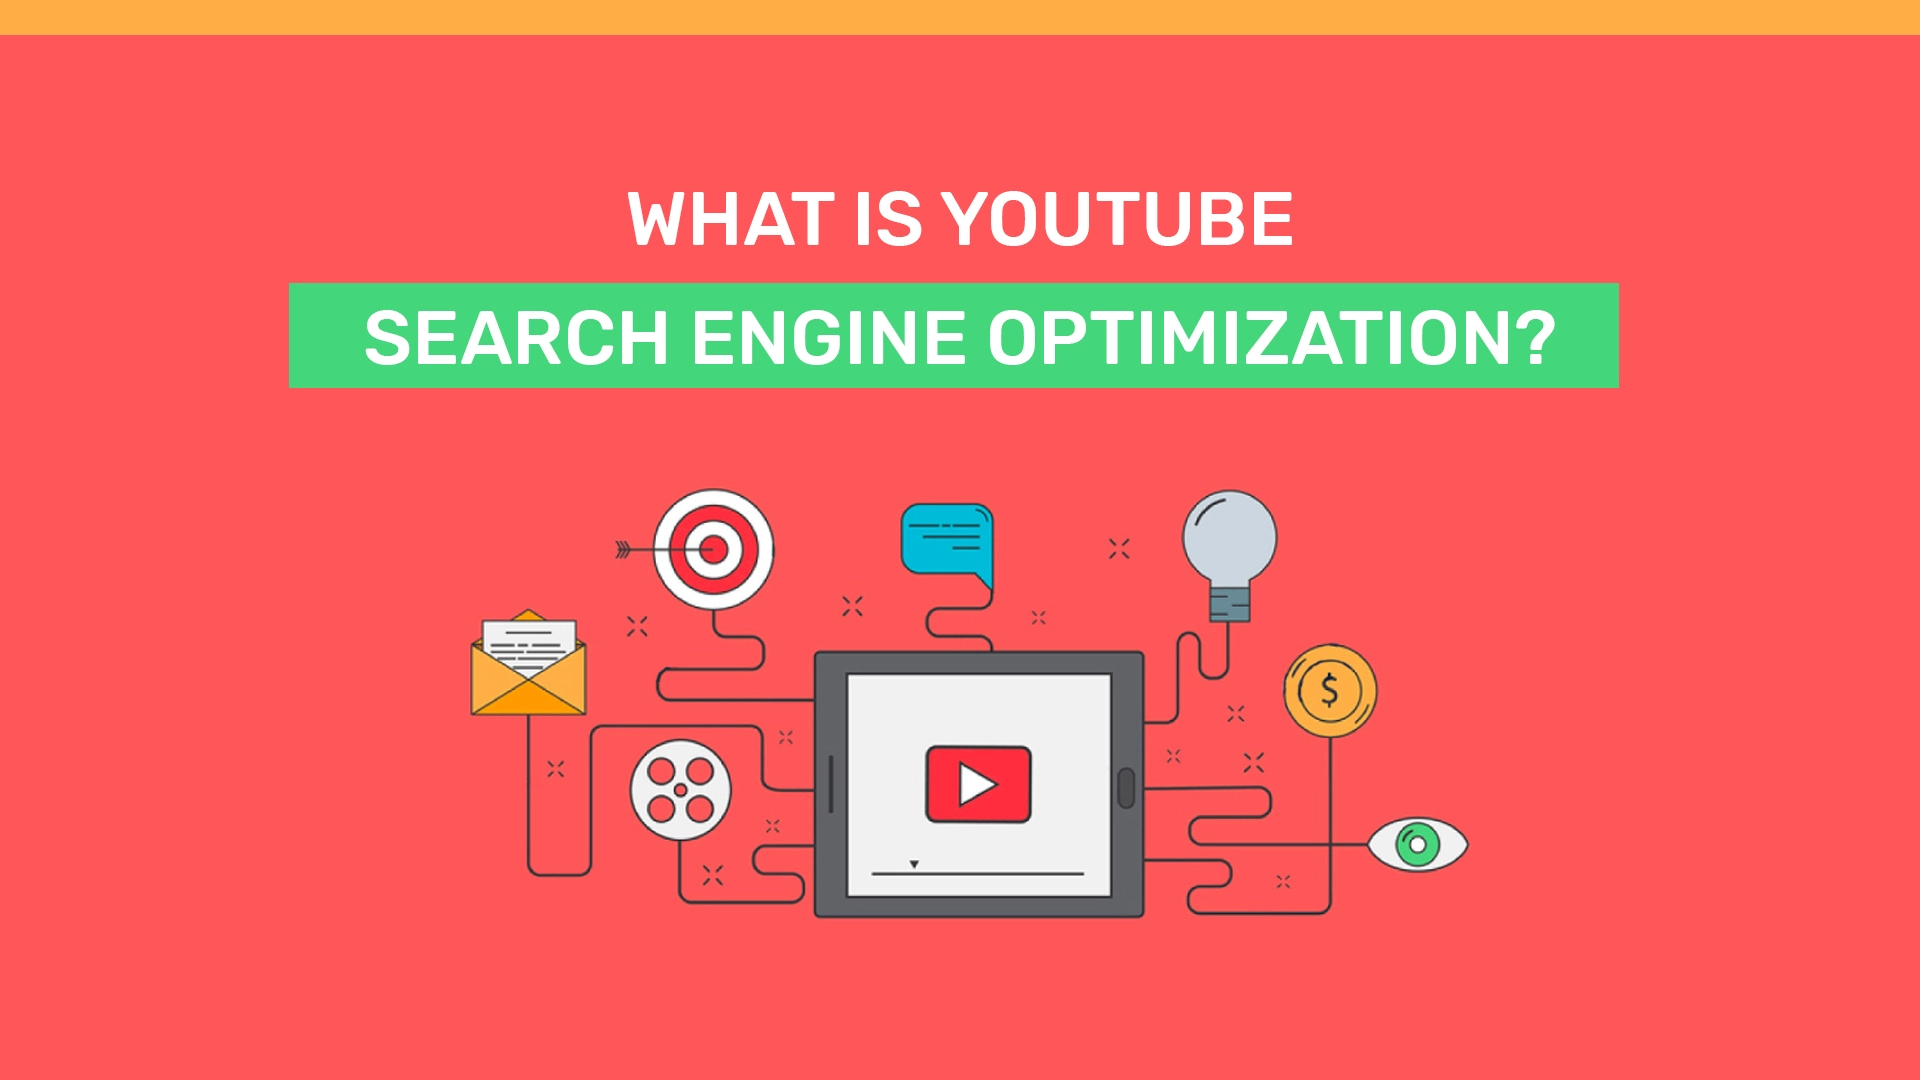 What is YouTube Search Engine Optimization?